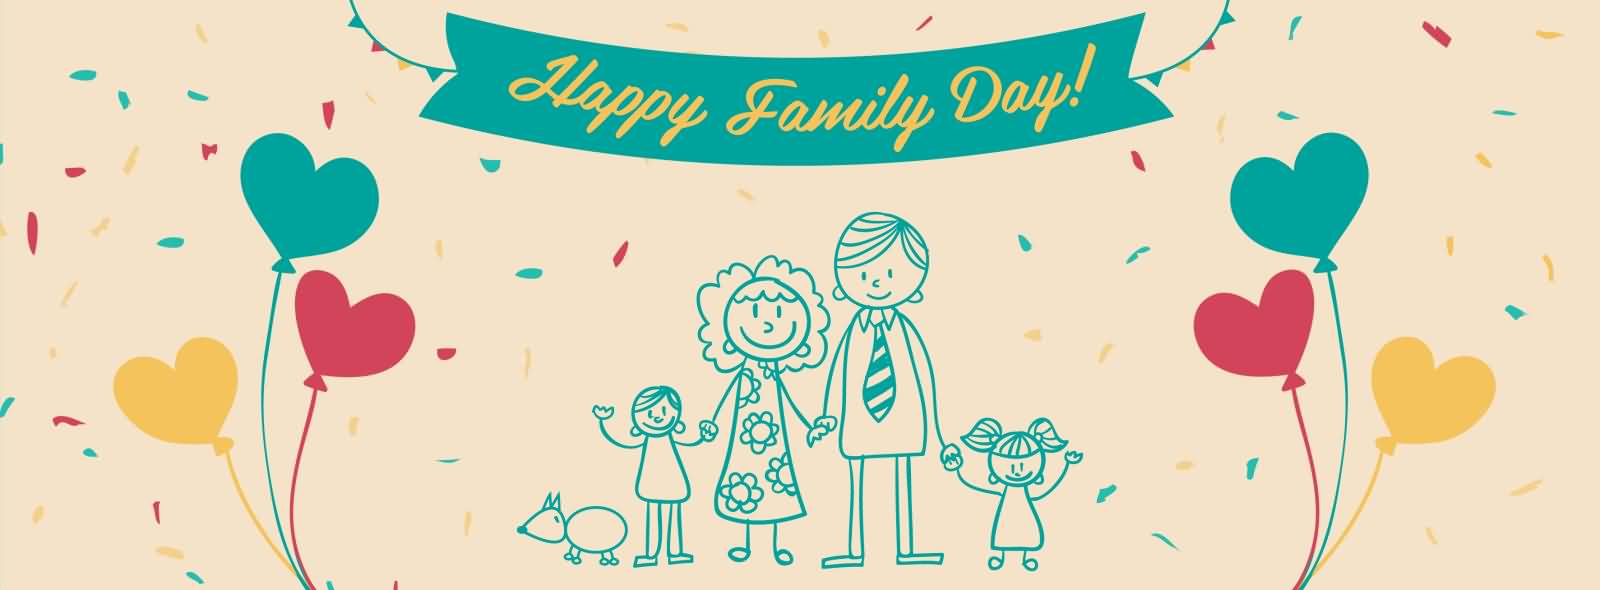 Happy Family Day Facebook Cover Picture